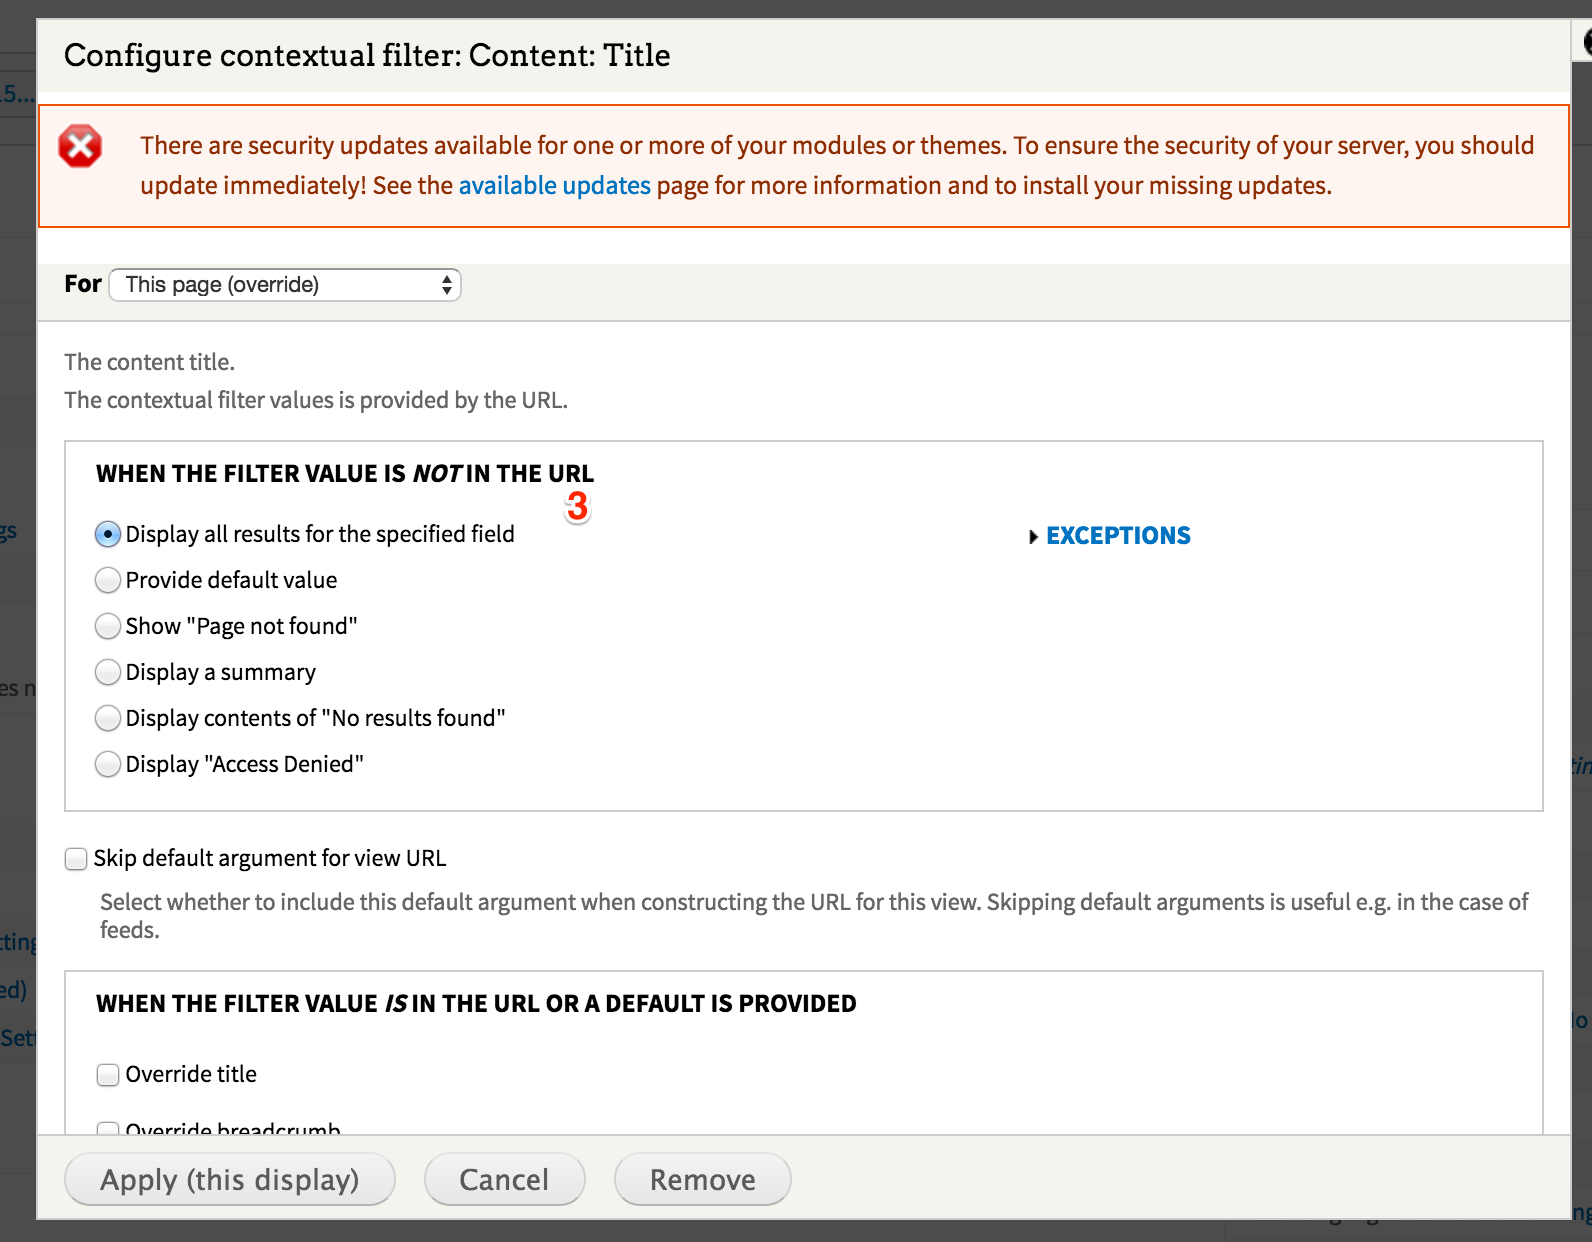 Screenshot for step 3 of setting up the contextual filter.